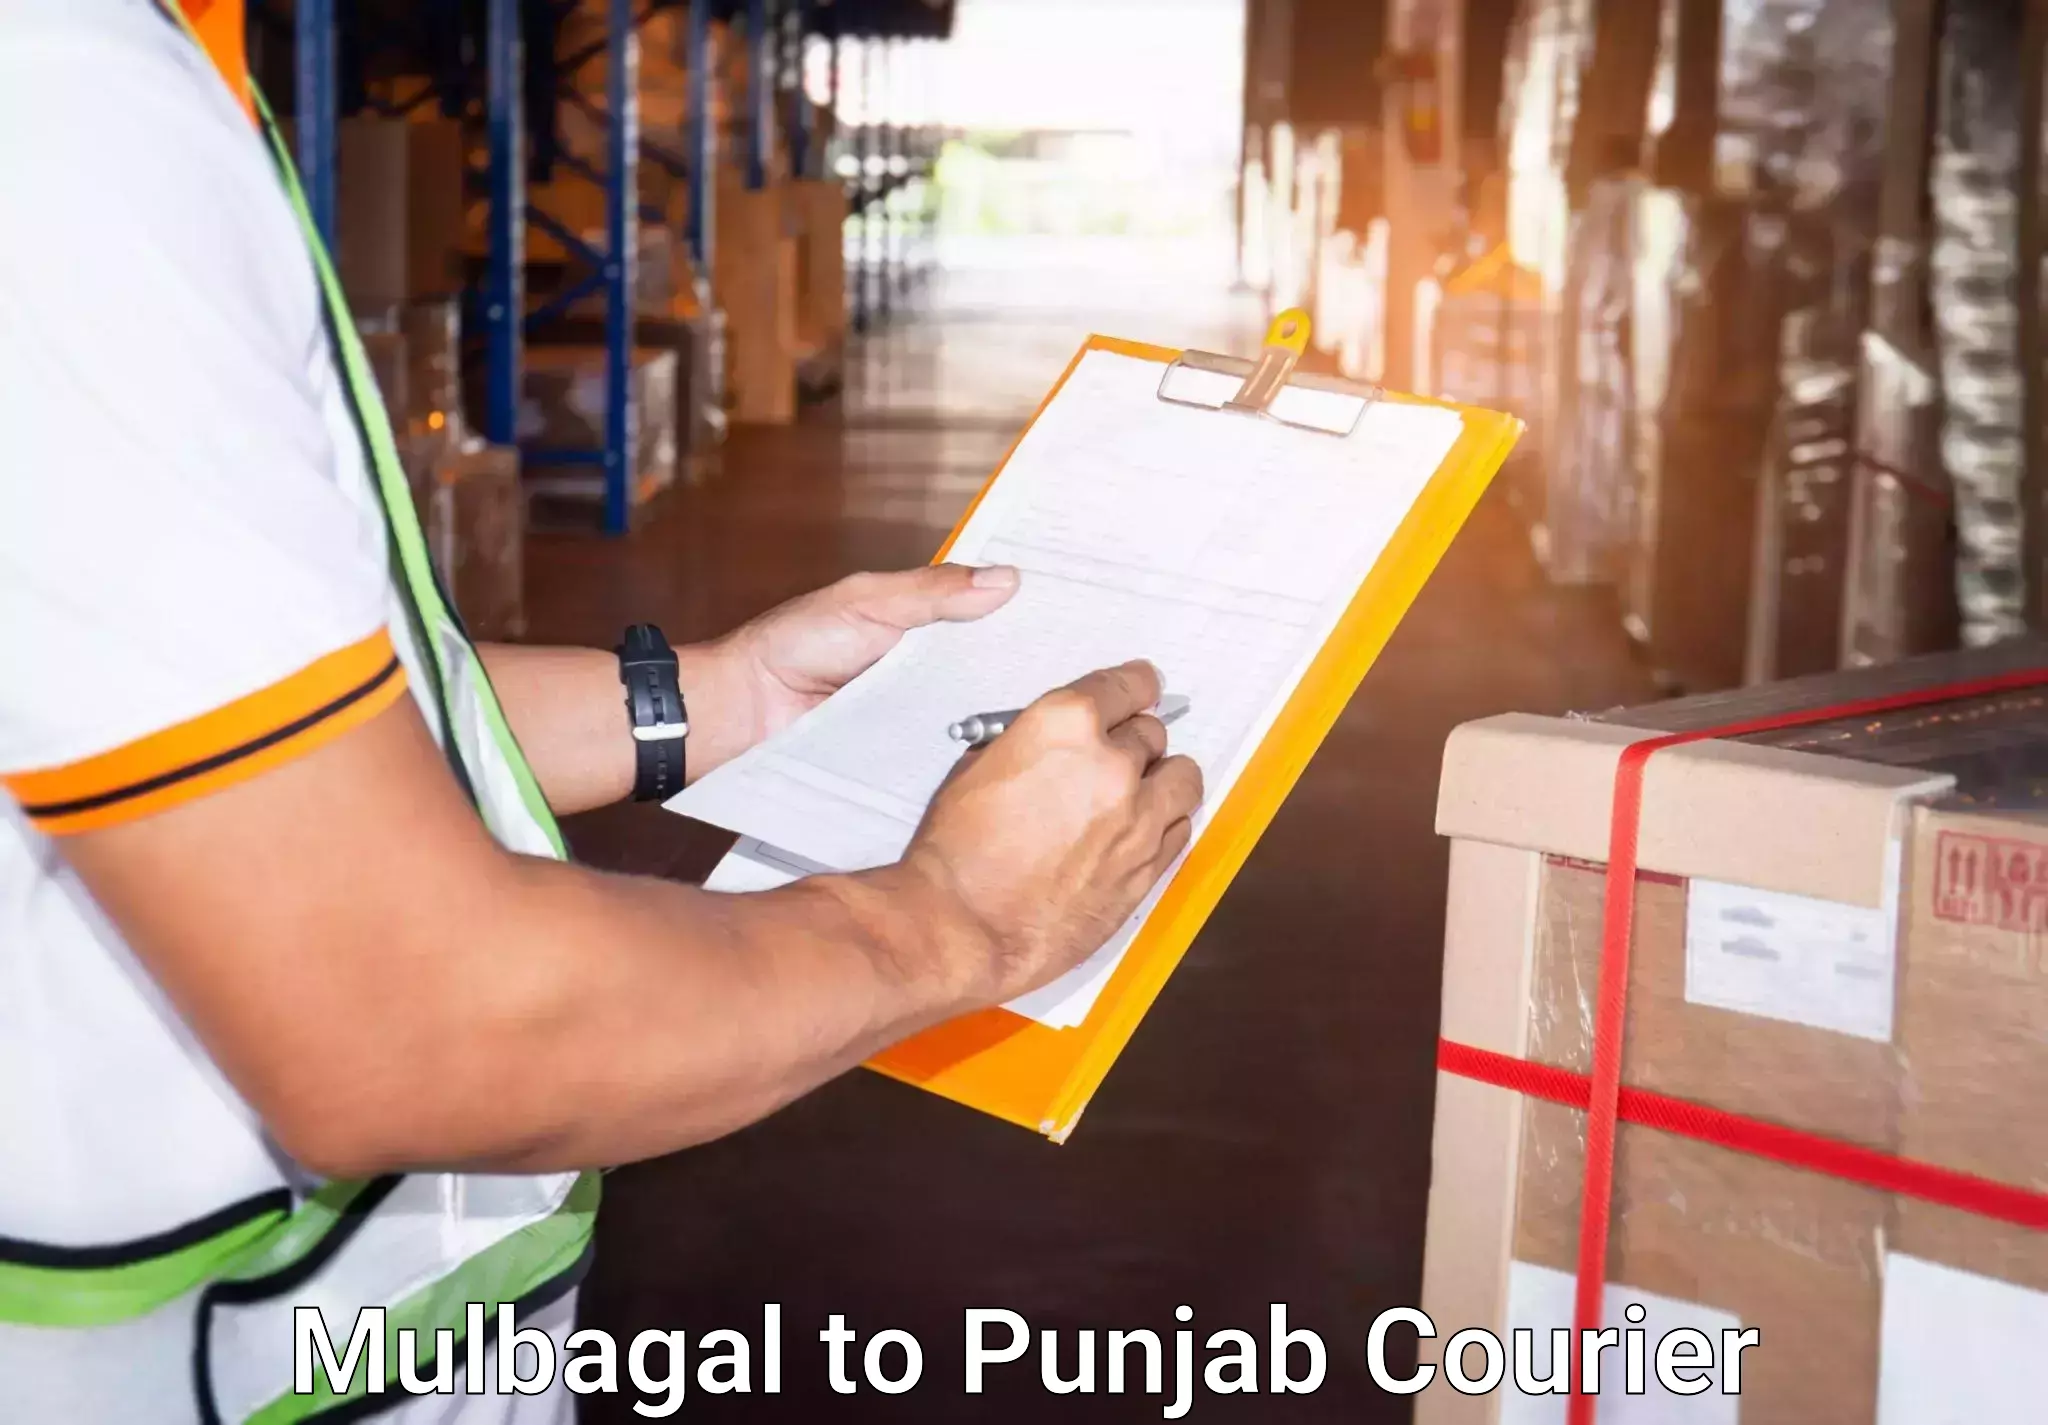 Emergency baggage service Mulbagal to Amritsar